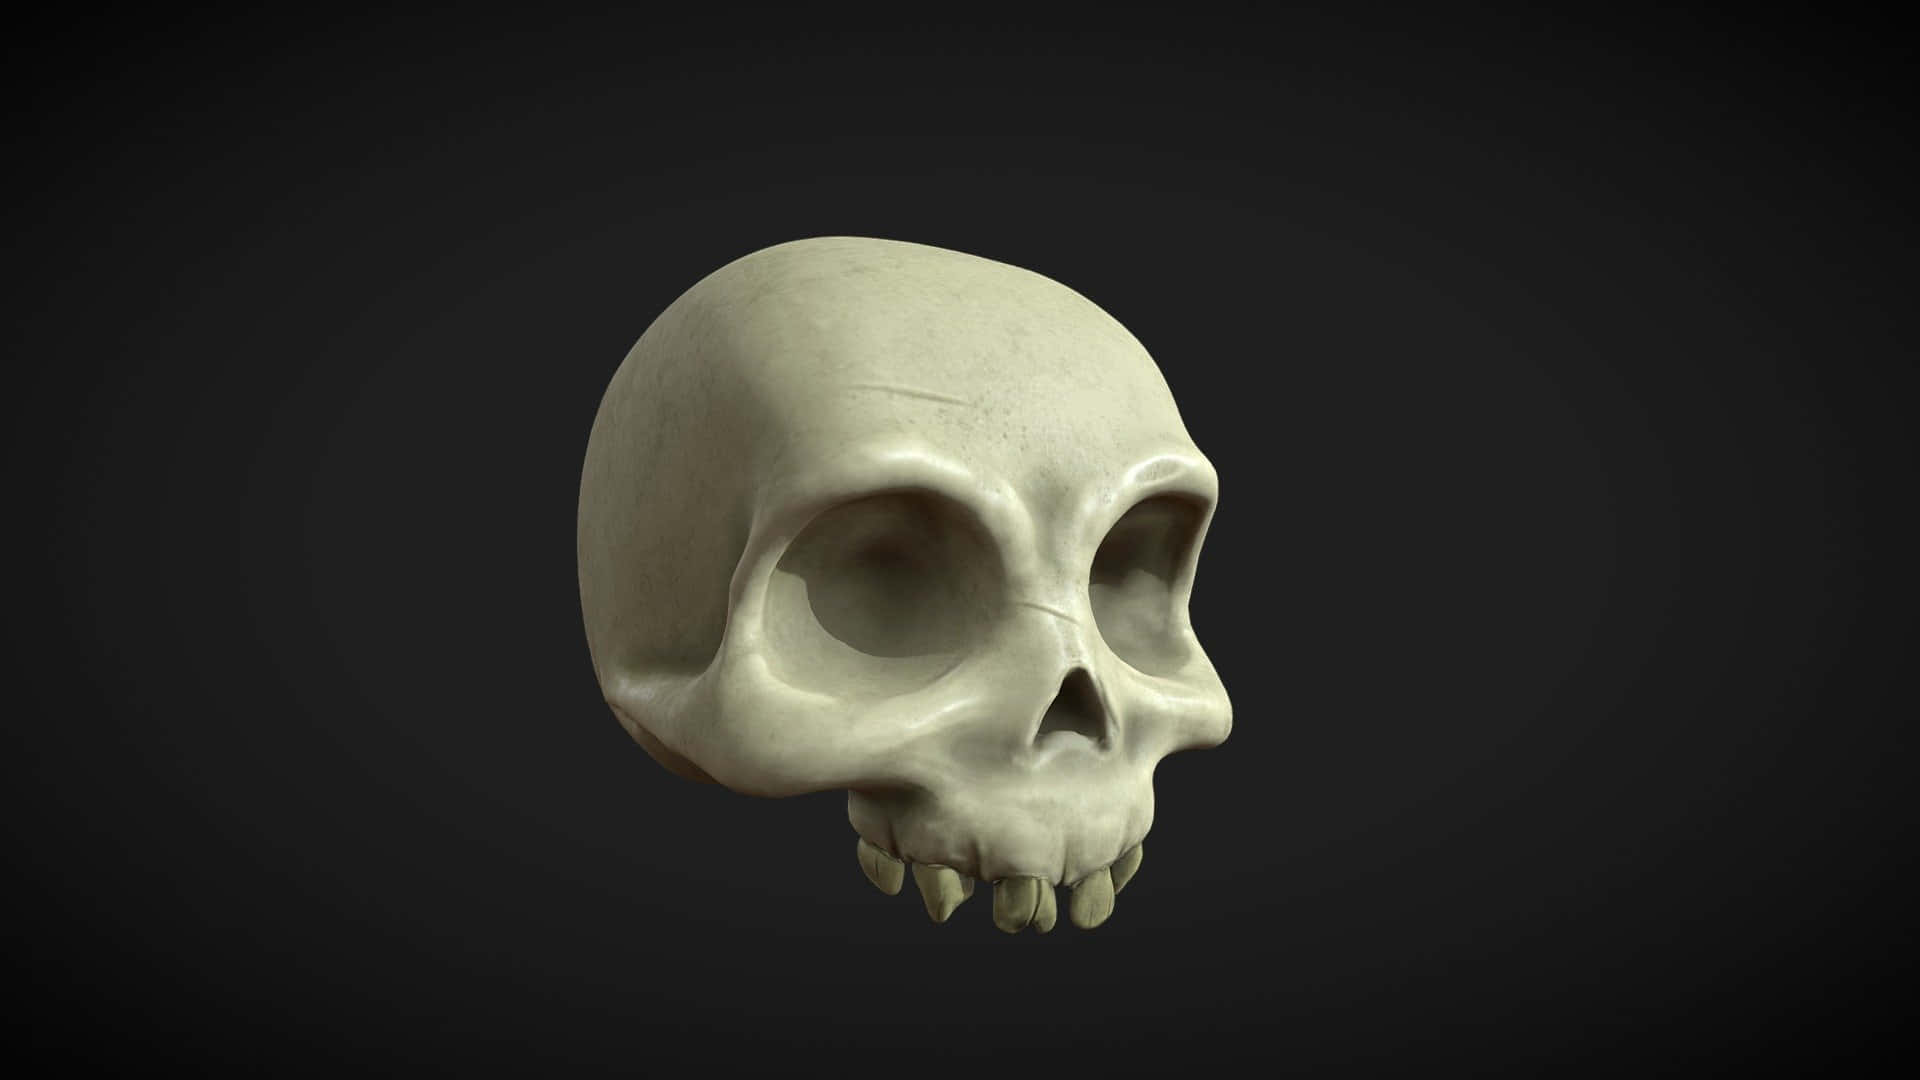 awesome 3d skull wallpapers